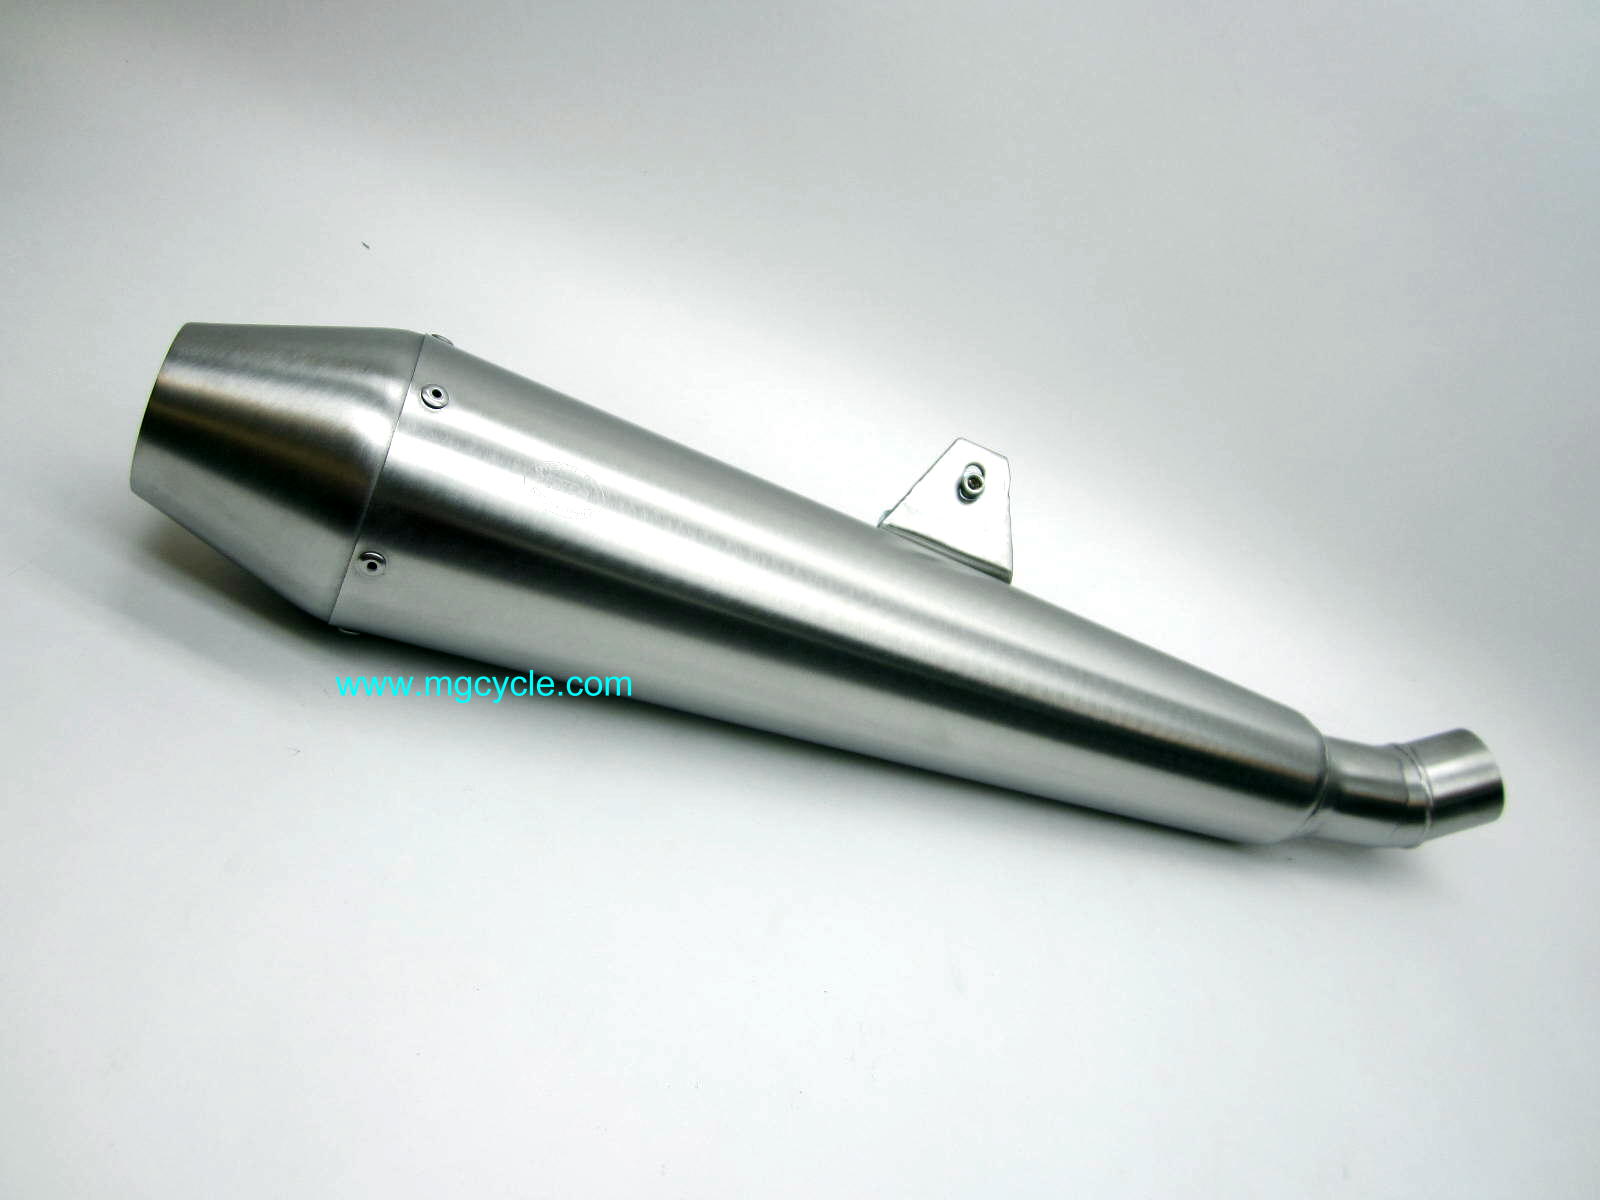 Mistral slip-on muffler for Ducati Scrambler, stainless steel - Click Image to Close